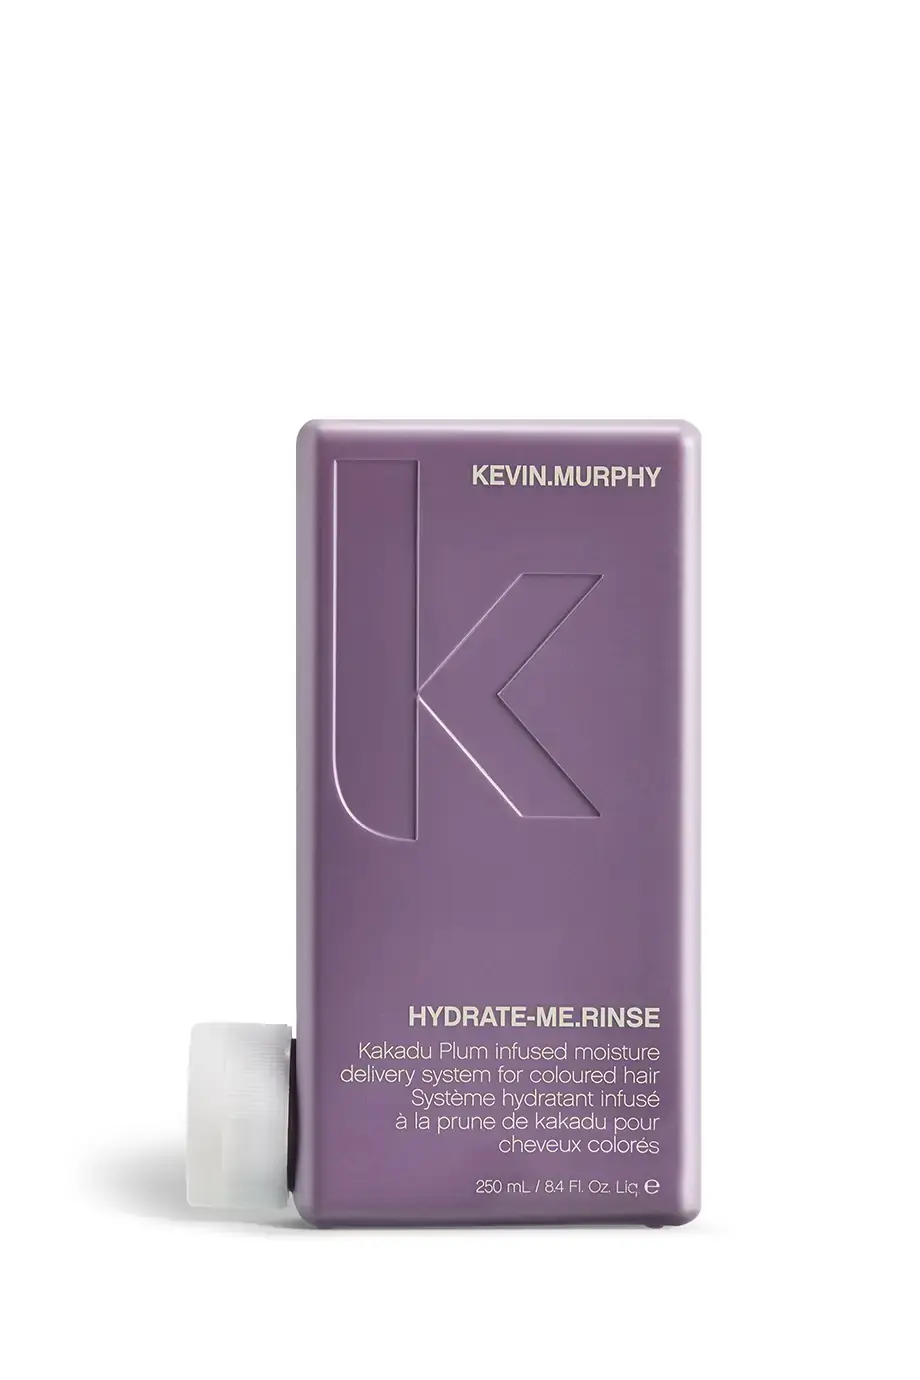 KEVIN.MURPHY Hydrate-Me.Rinse